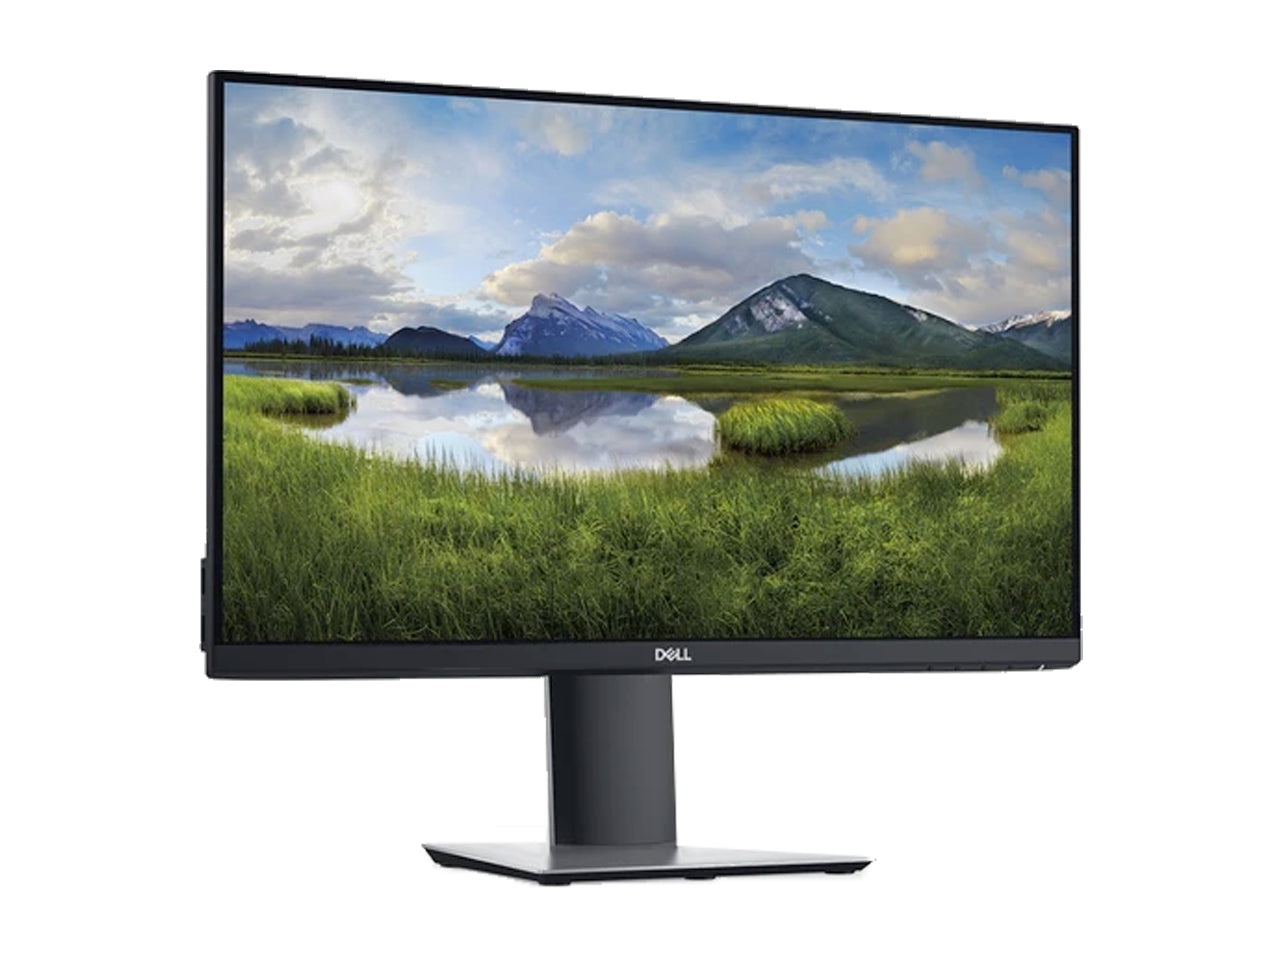 Dell P2419H P Series 24" Screen LED-Lit Monitor